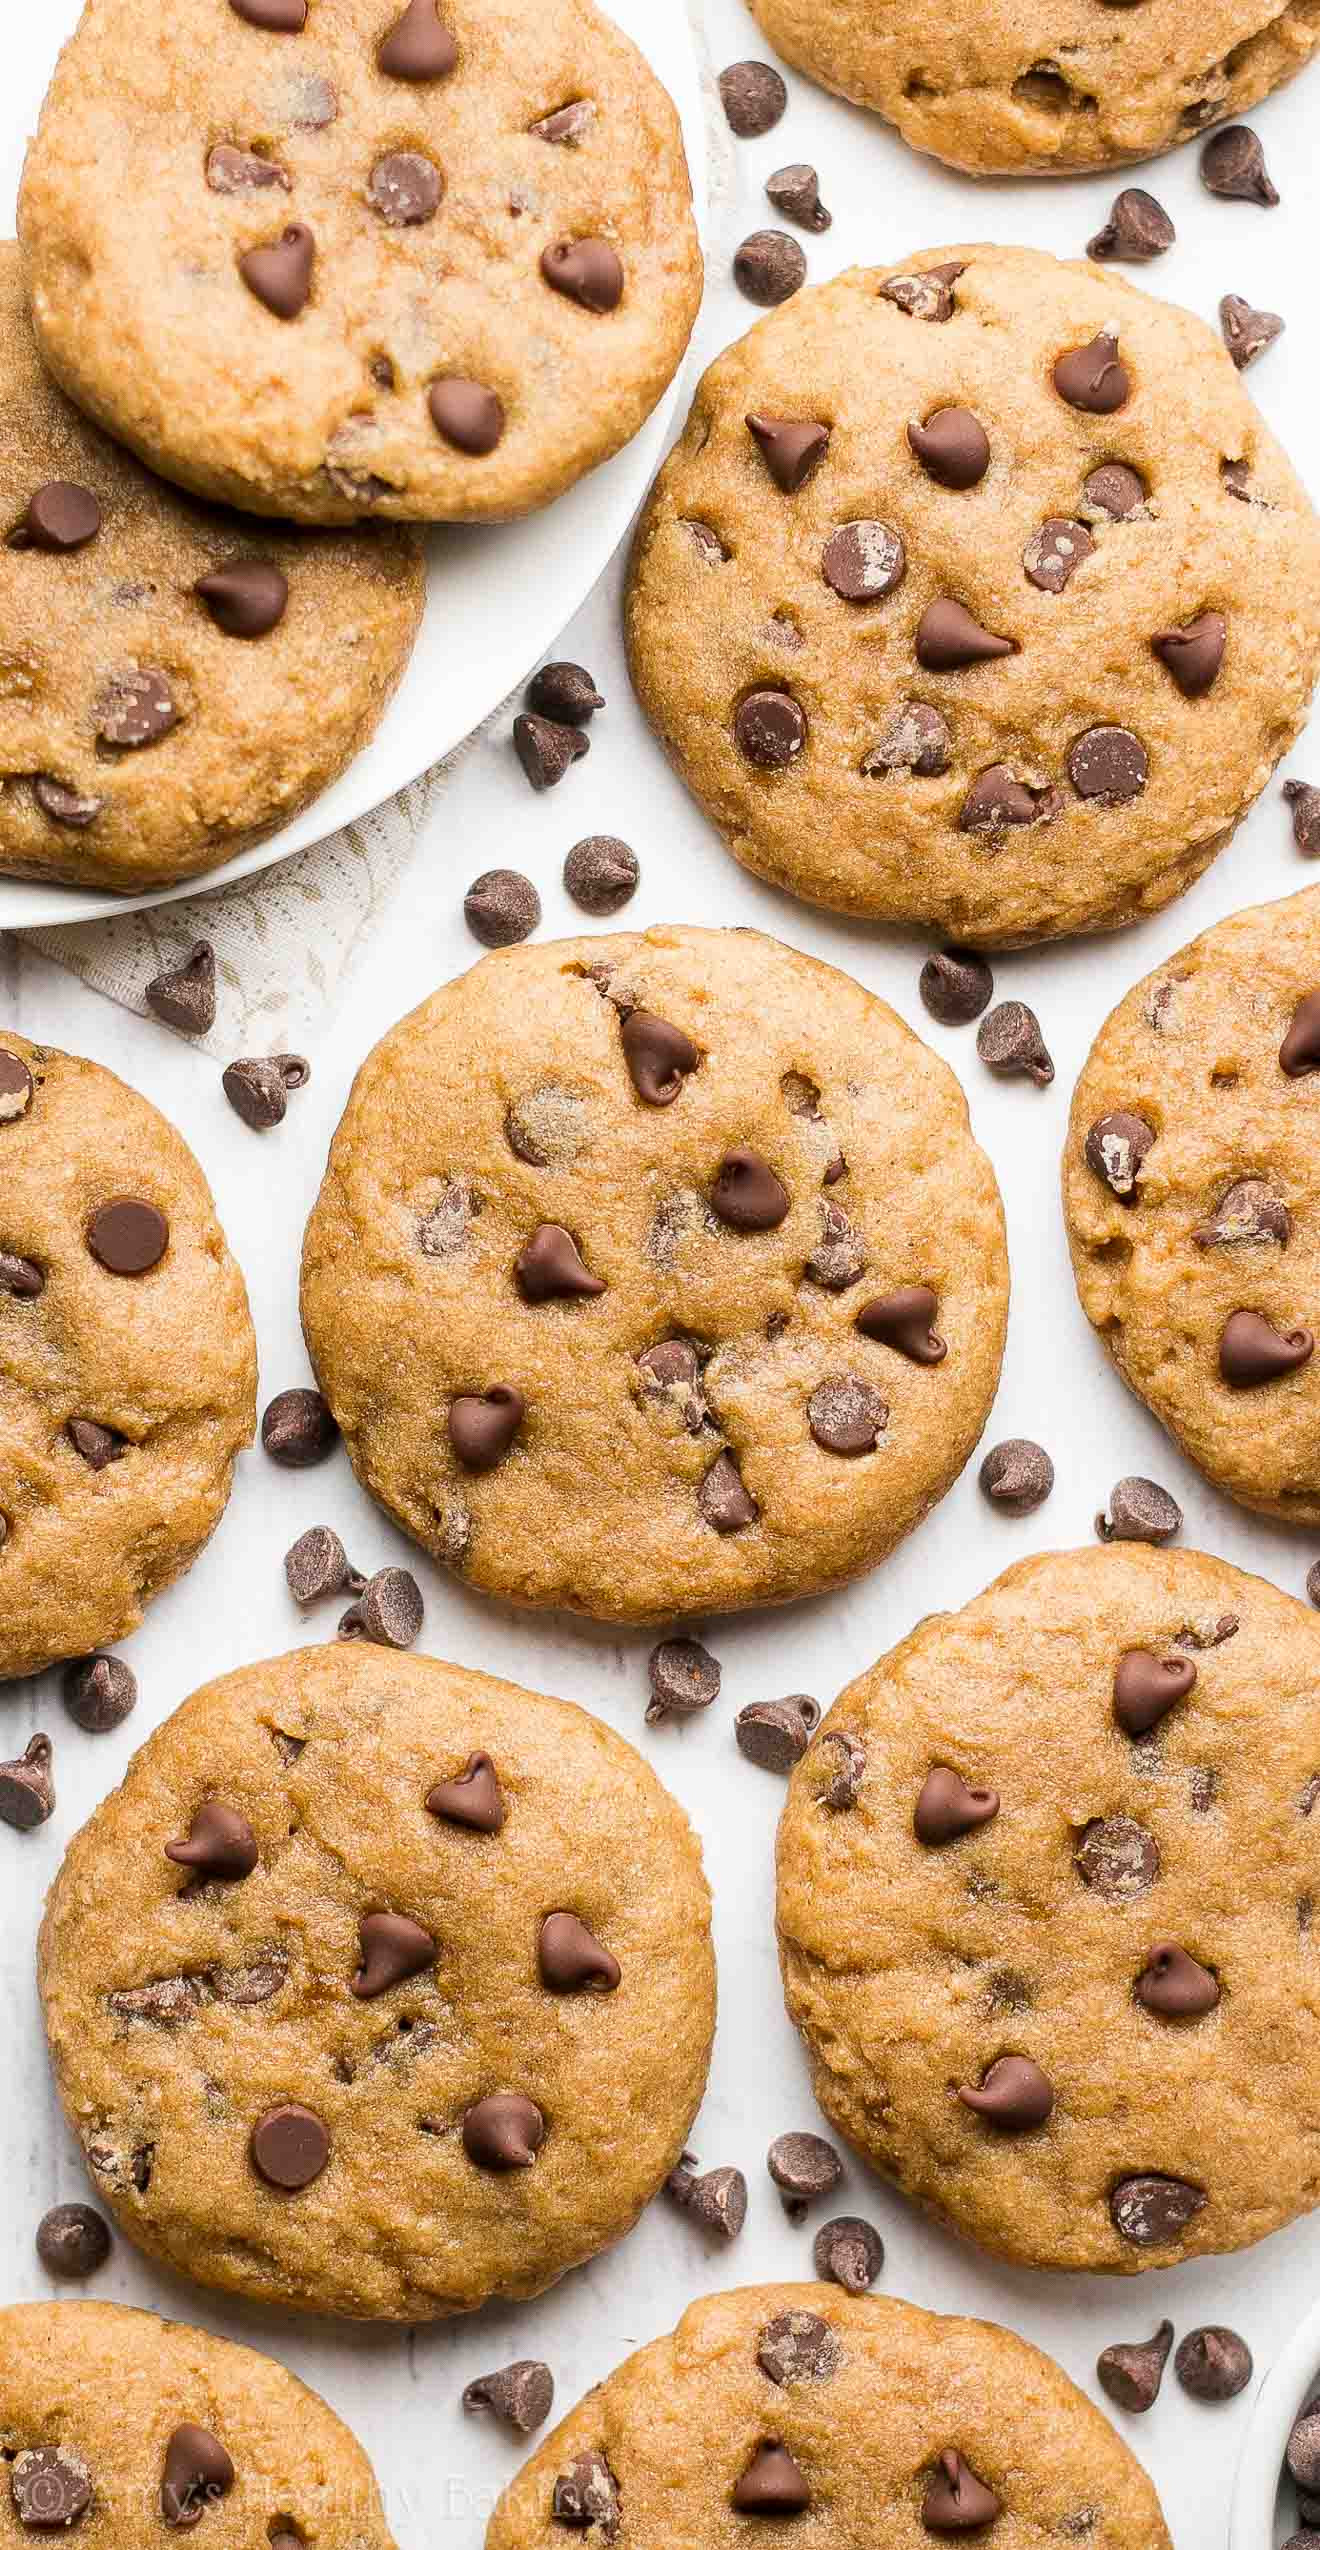 Chocolate Chip Cookies Recipe Healthy
 healthy recipes chocolate chip cookies